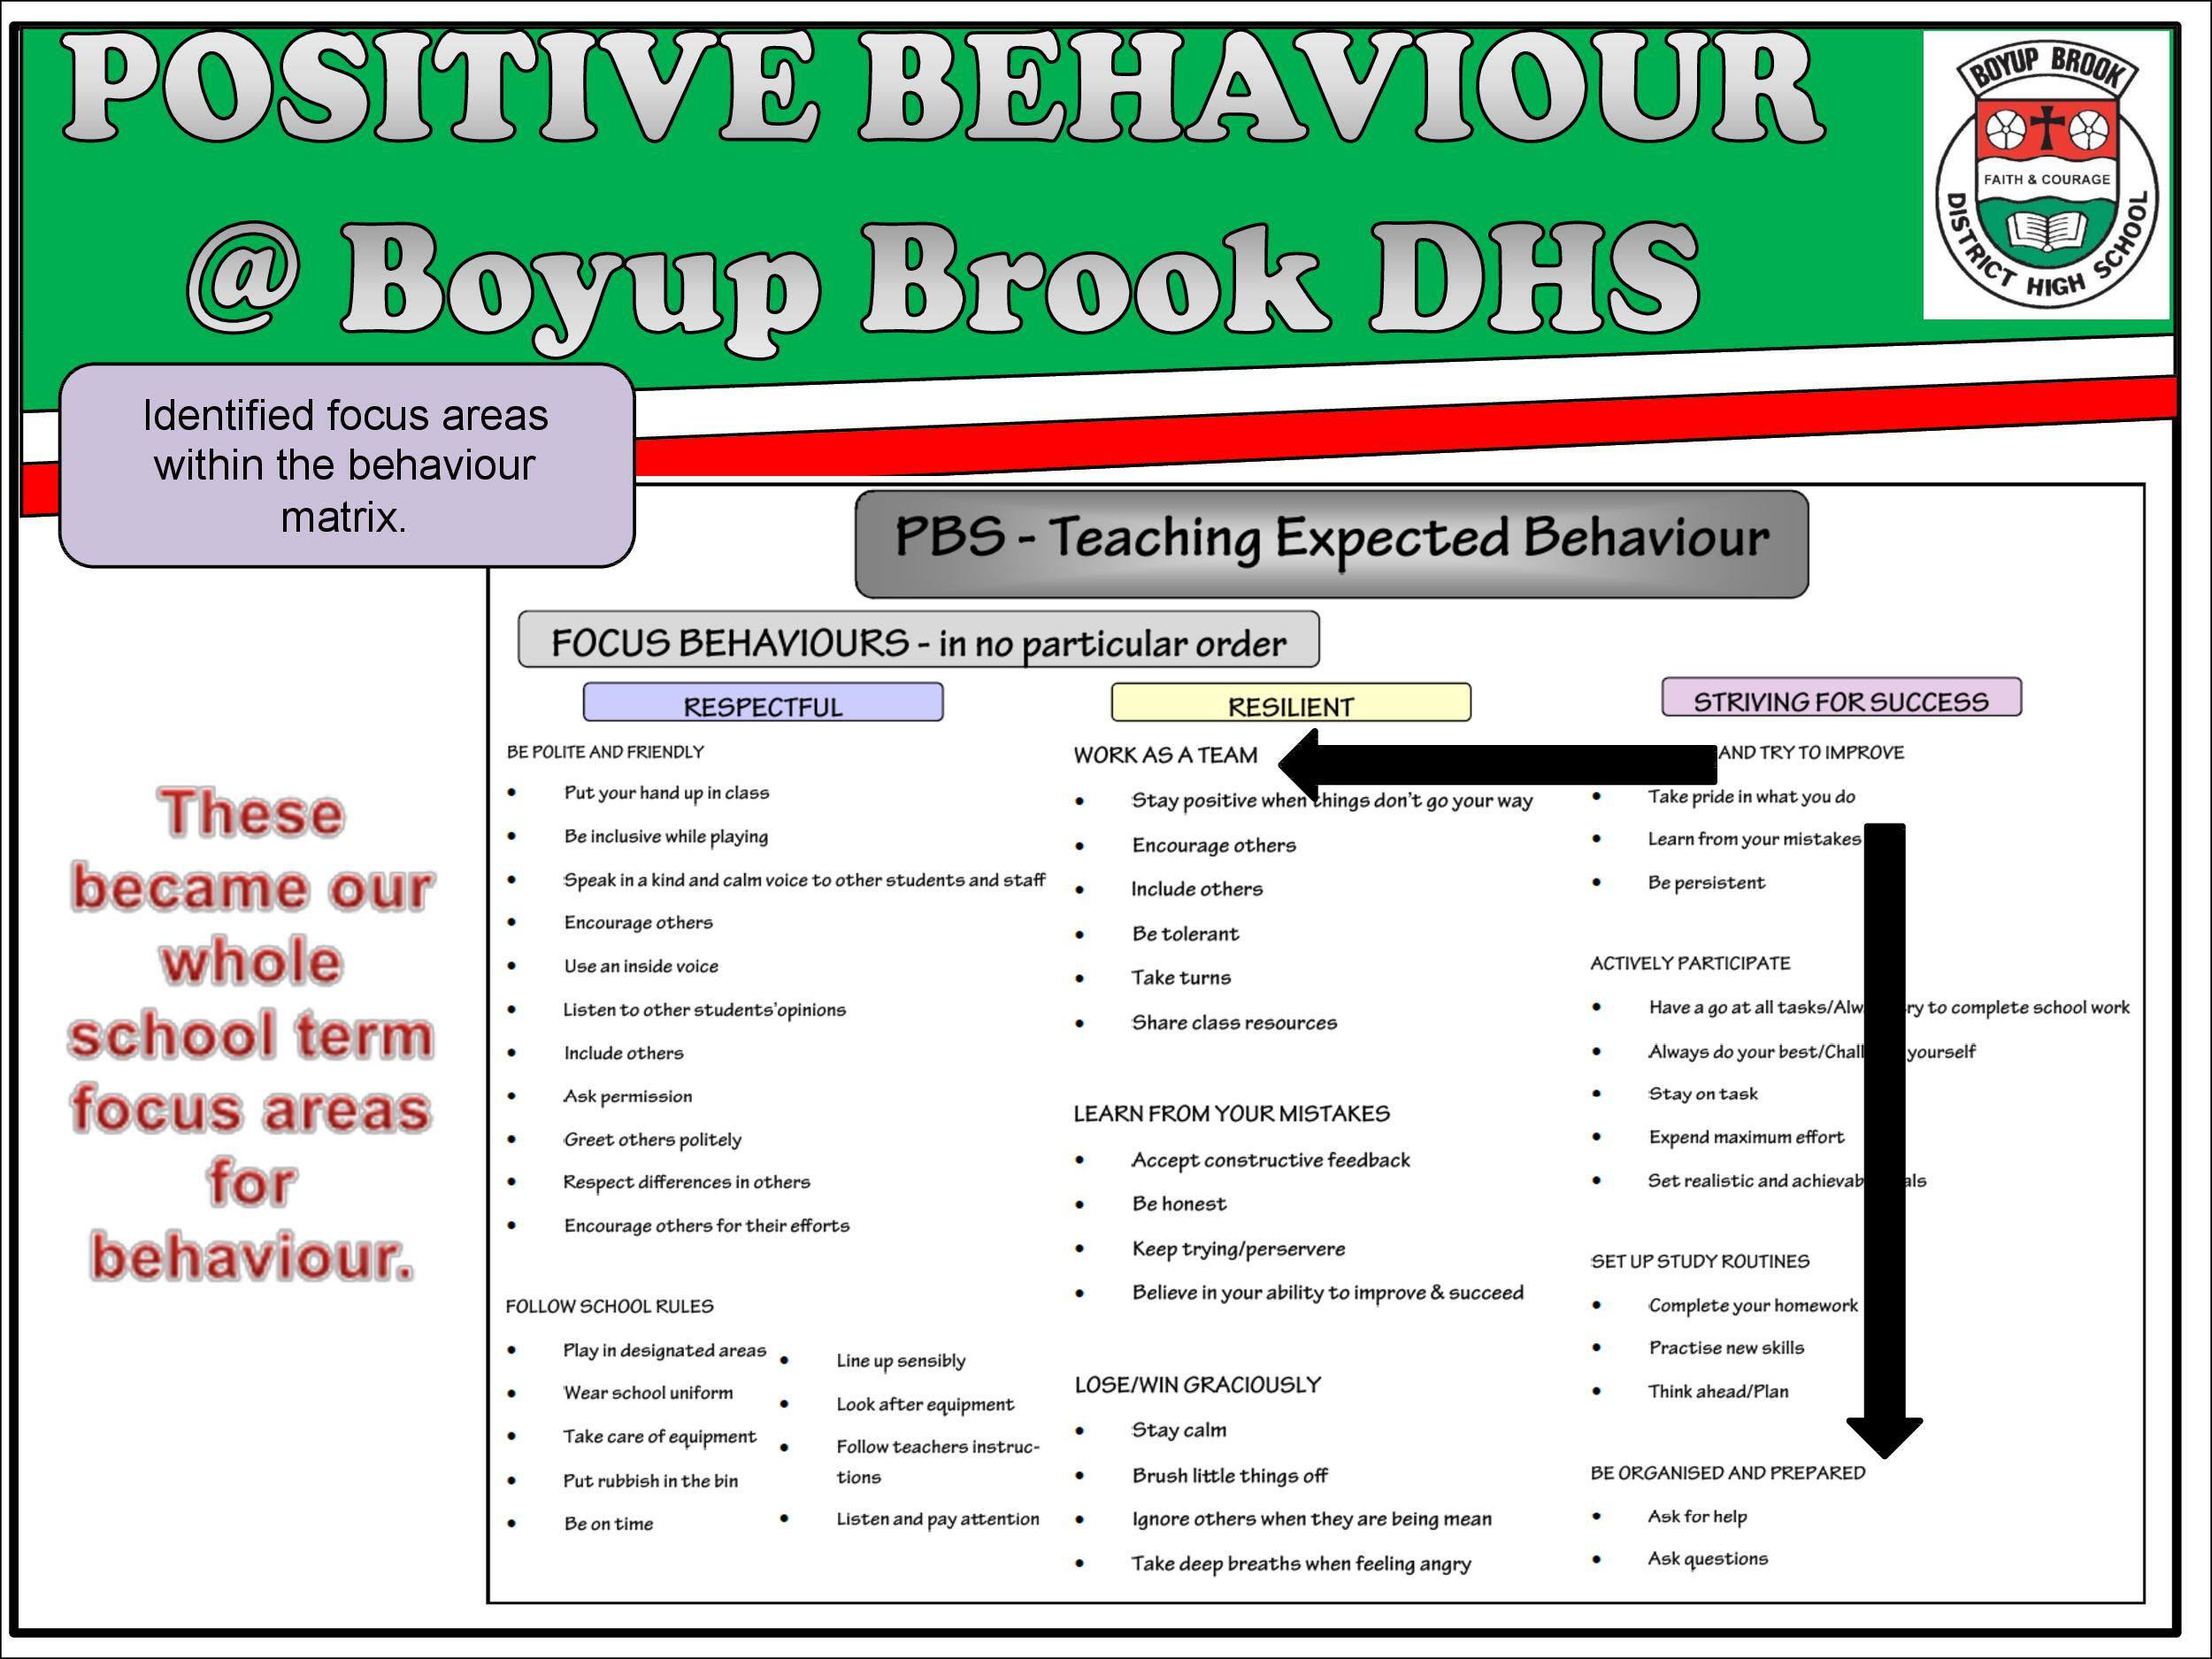 Positive Behaviour Support Page 16